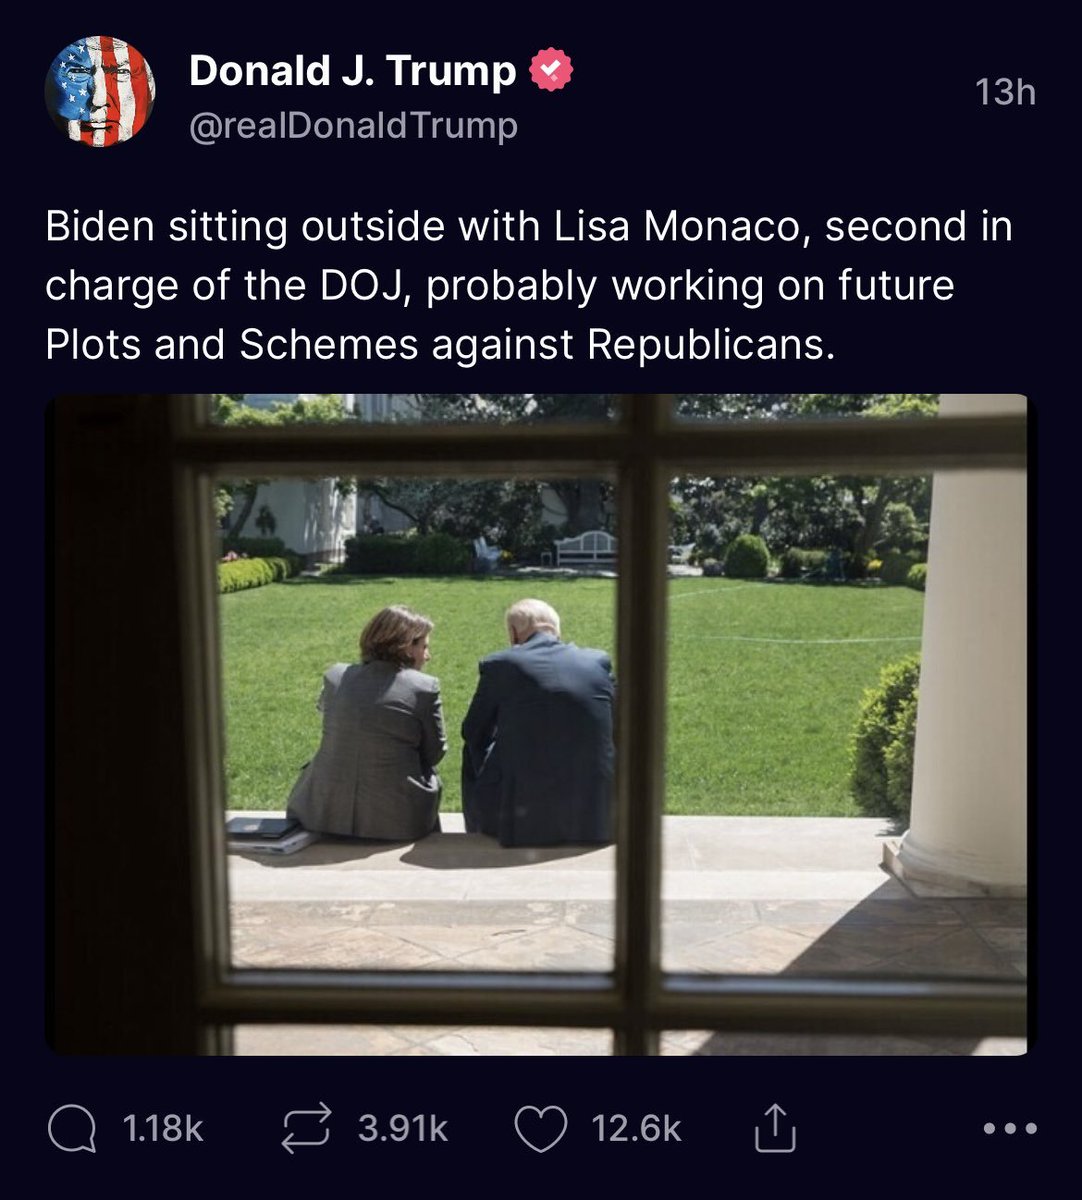 @mmpadellan Trump keeps giving lessons on how to fail at propaganda, smear tactics. He posted this on Truth Social. It's a photo from 2013, when Biden was VP. But he's misconstruing it as now, to create an illusion of meddling. He's a serial liar. #TrumpisaNationalDisgrace #TrumpIsGuilty